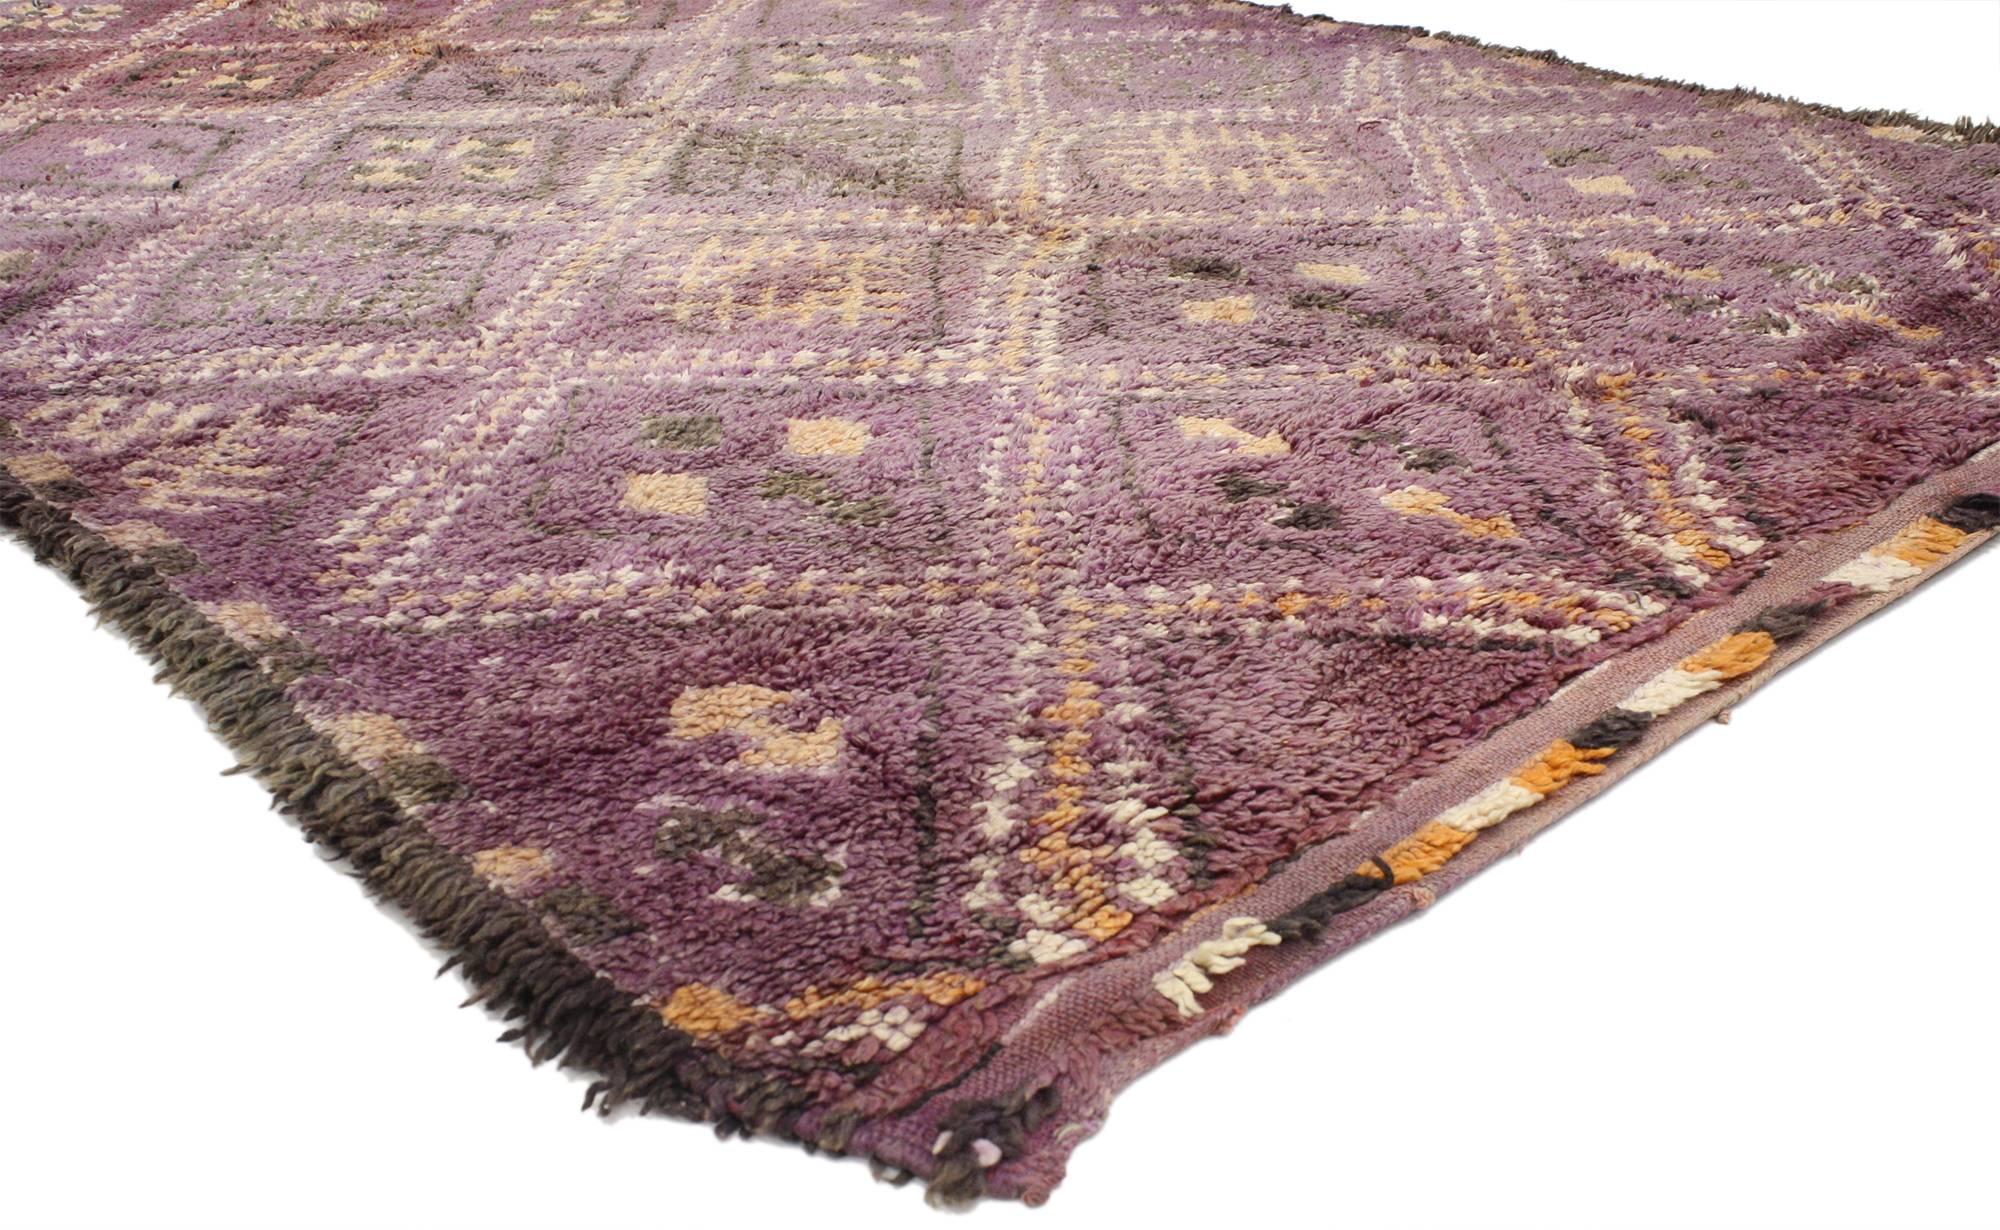 20602 Vintage Berber Moroccan Rug with Post-Modern Memphis Bohemian Style. A muted blend of majestic purple creates the perfect complimentary backdrop for the orange, beige and charcoal diamond trellis design that ornaments this vintage Berber